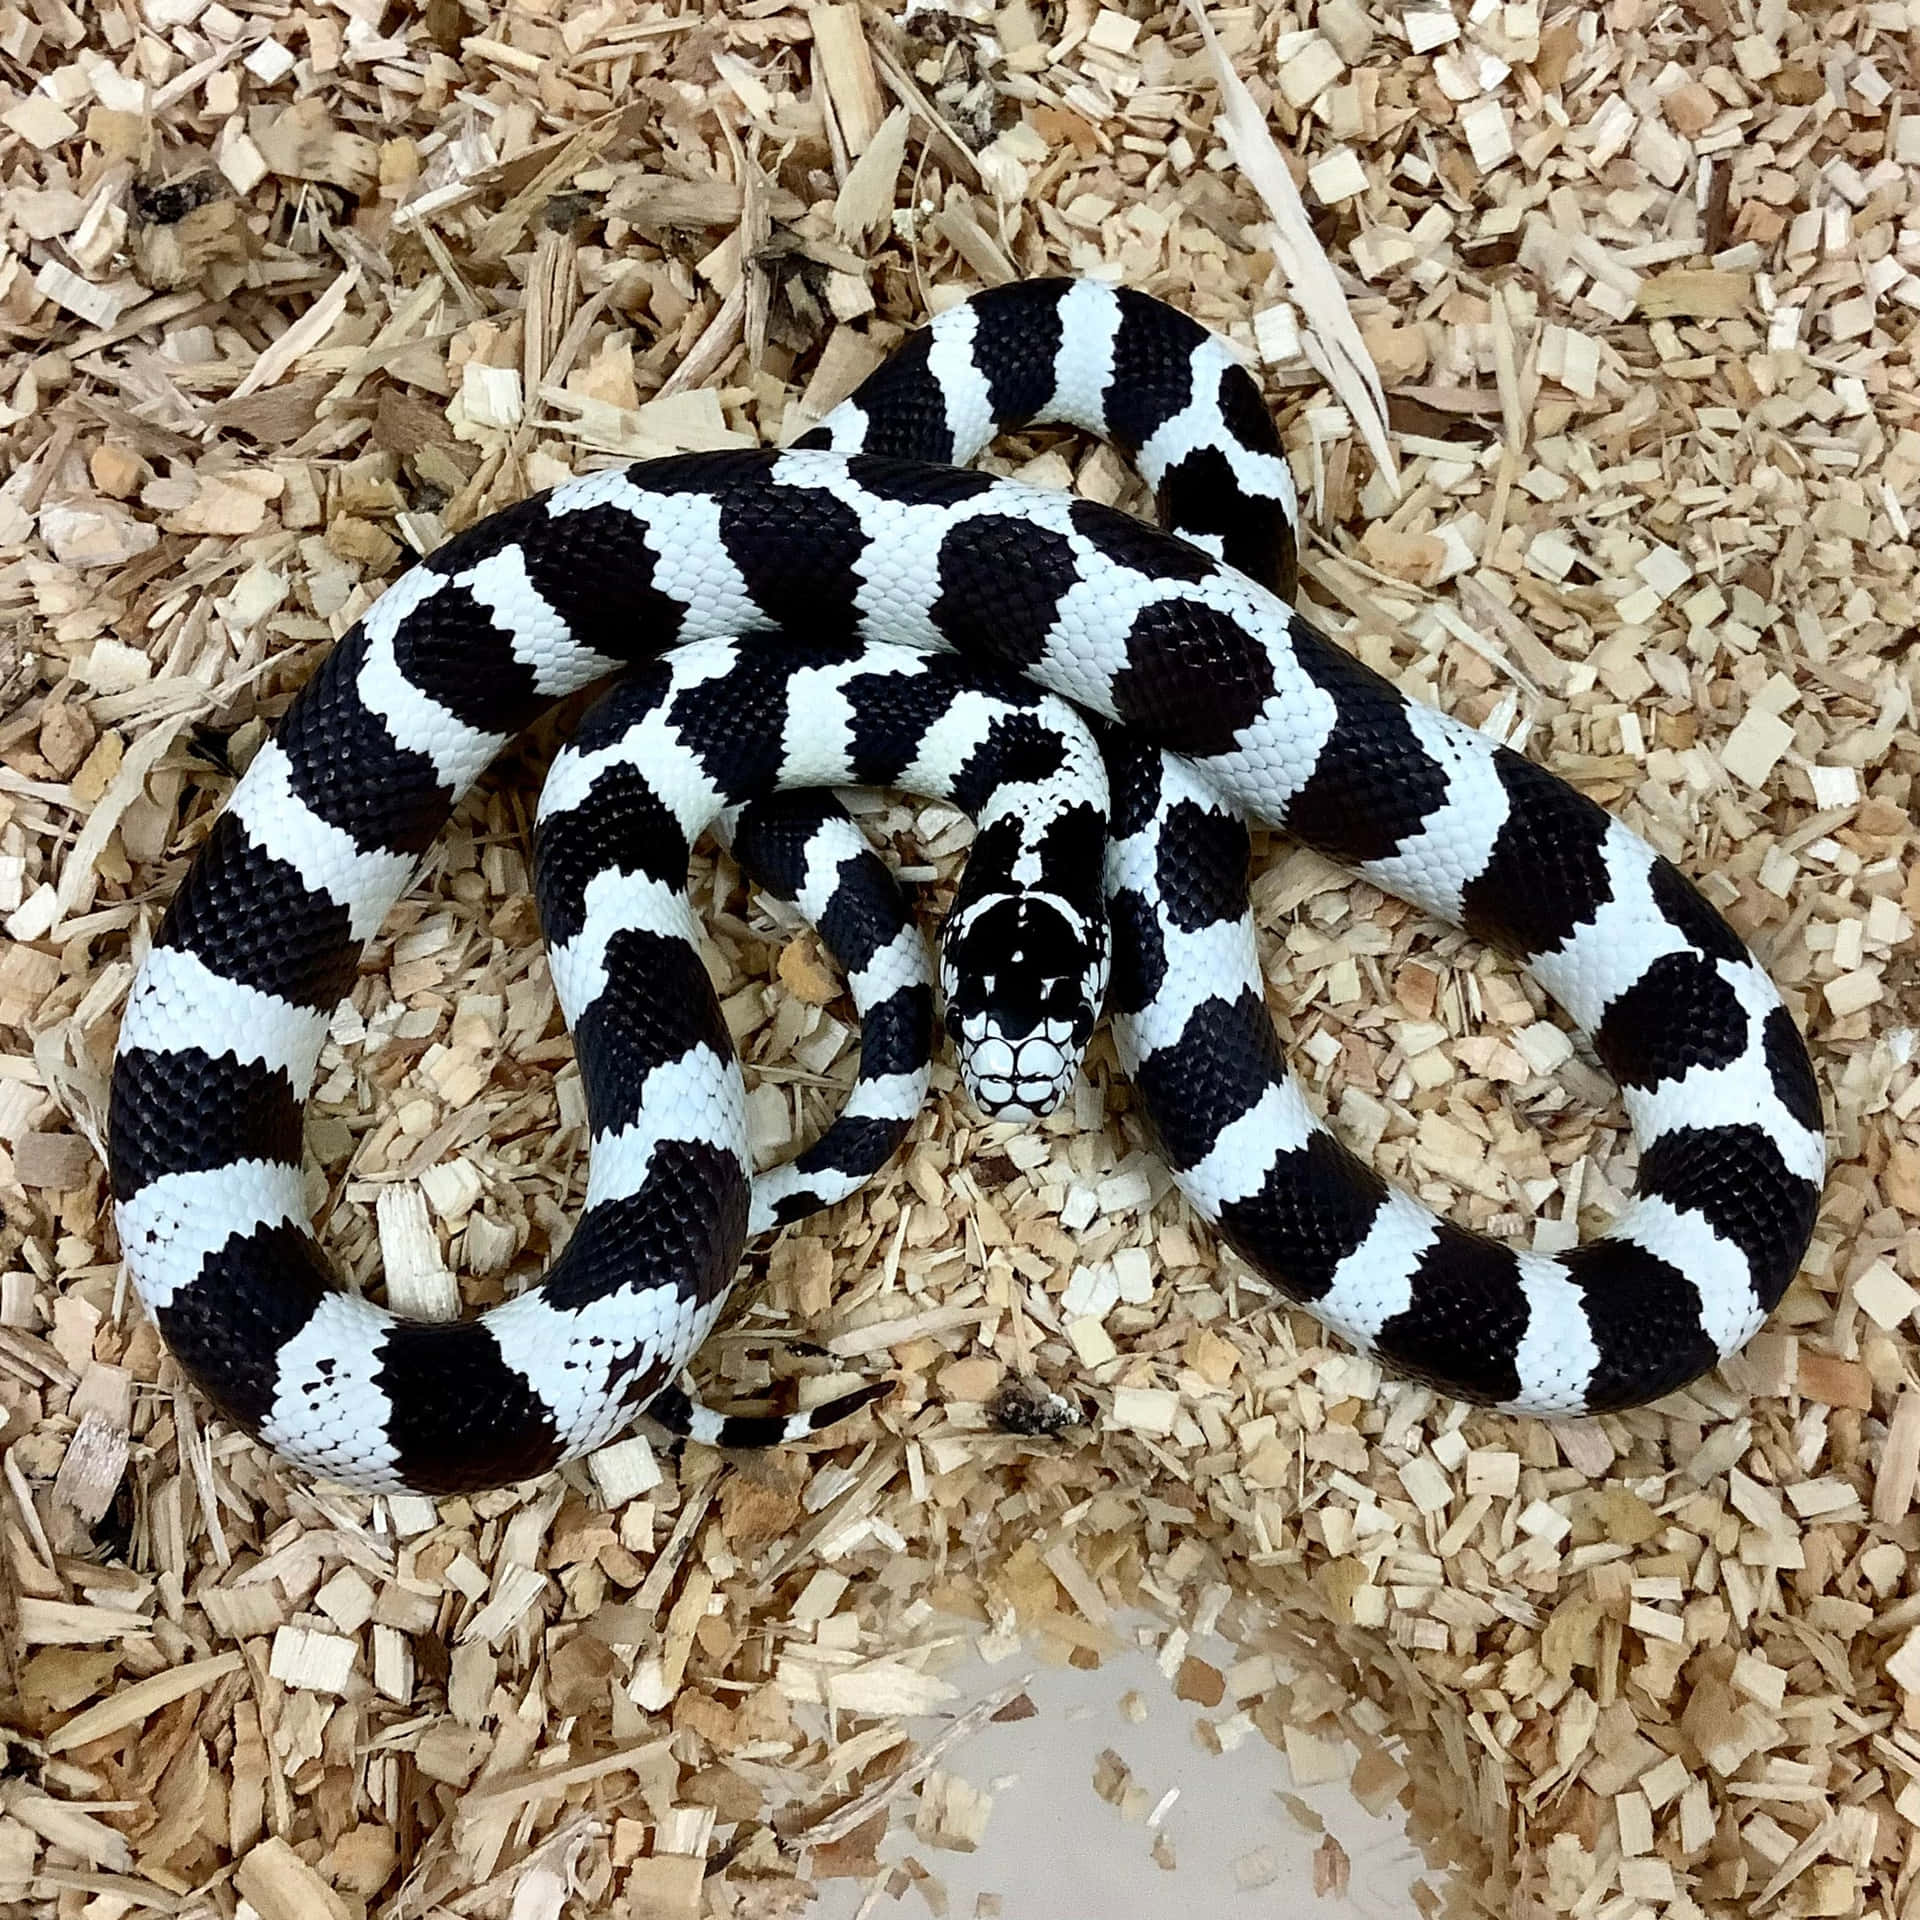 The brilliant colors of a majestic king snake.